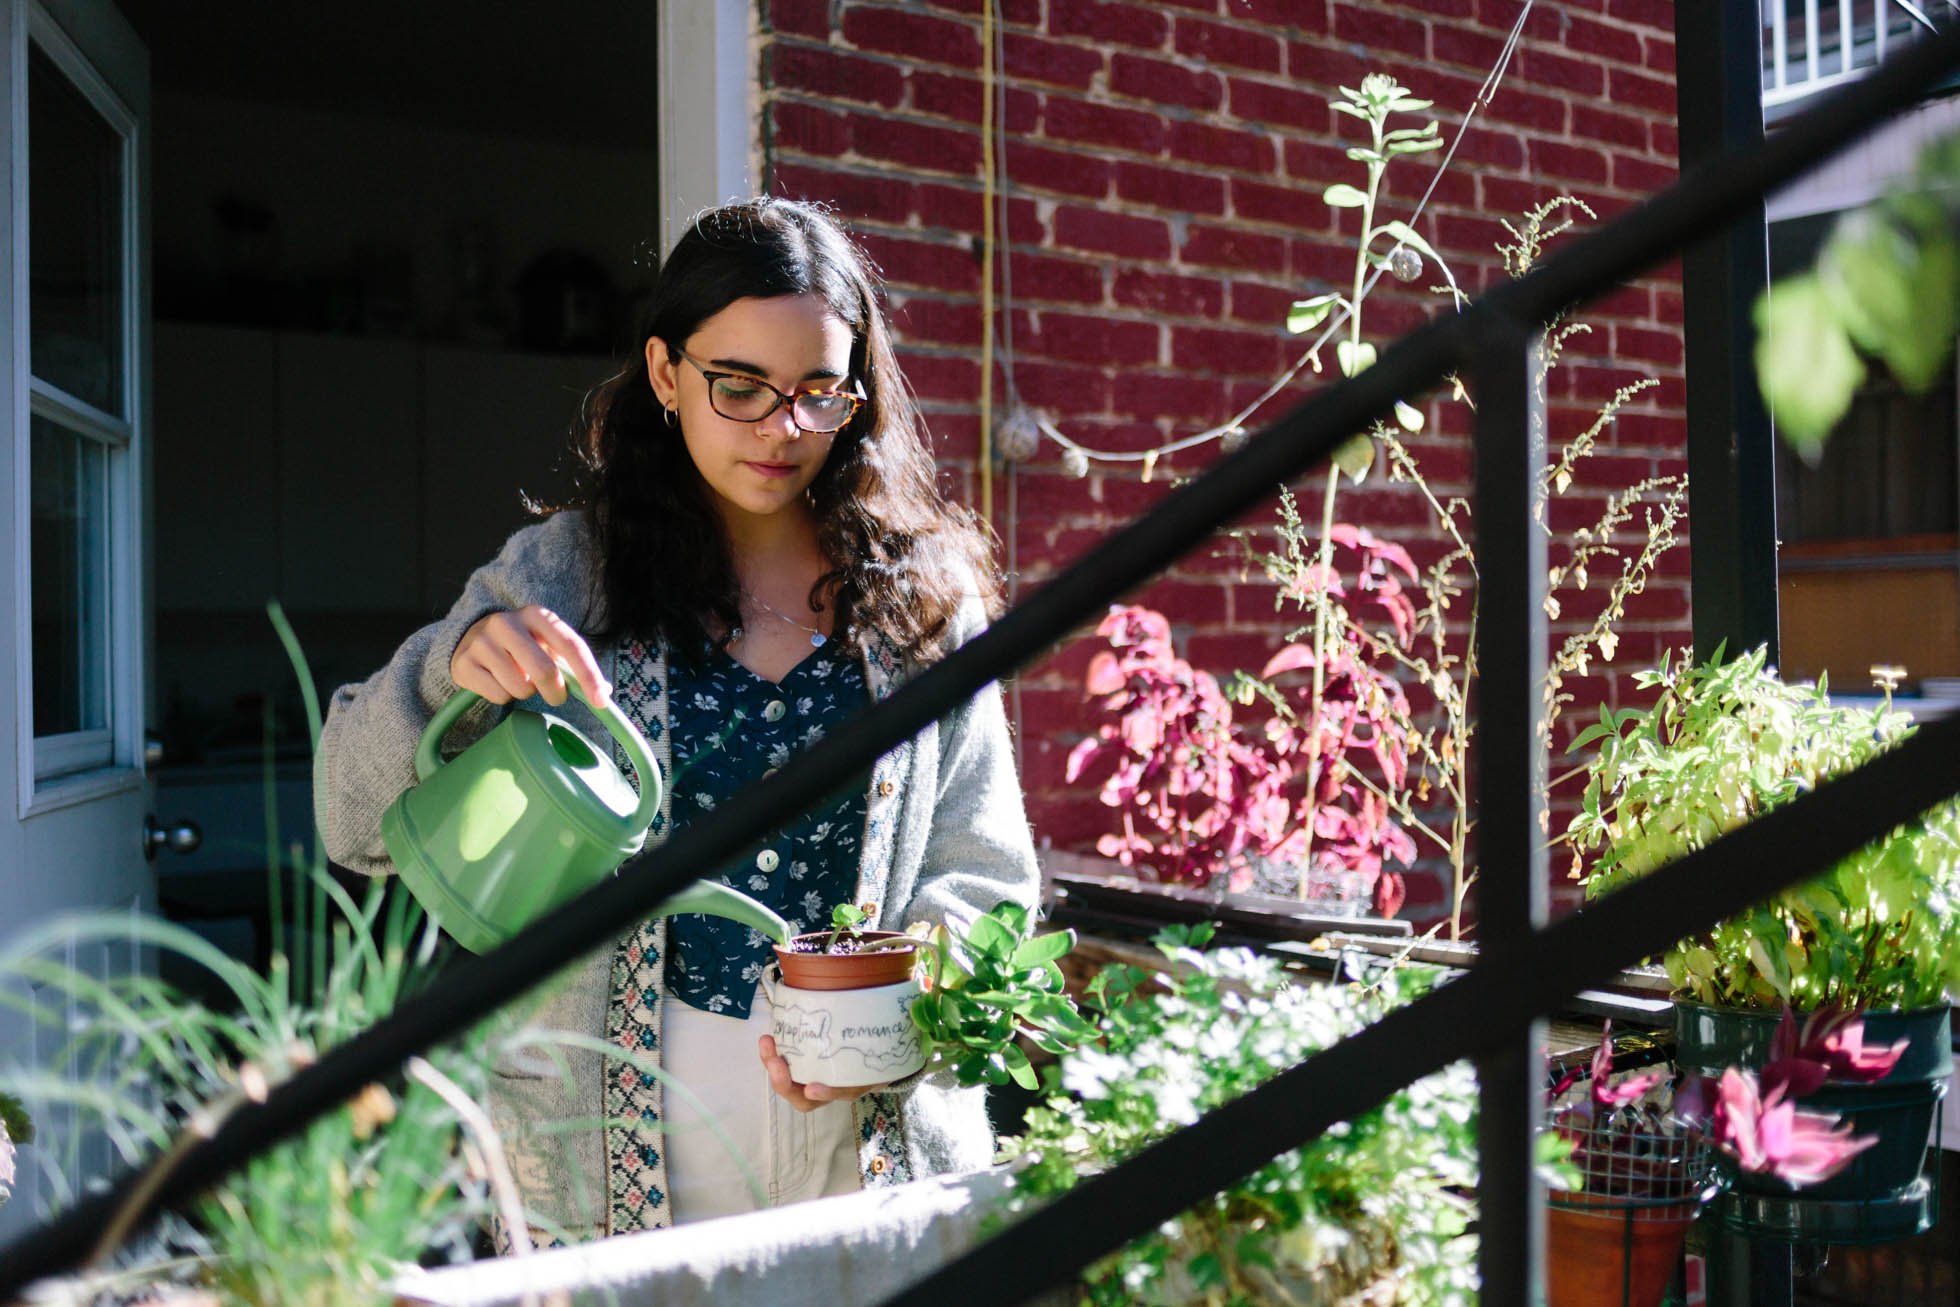  Hashmita uses a green watering can to water a small plant on her balcony garden. In classic Montréal fashion, Hashmita's balcony is tiny, barely 3 feet by 5 feet, but she's been able to do a lot with such a small space. While some might leave this s